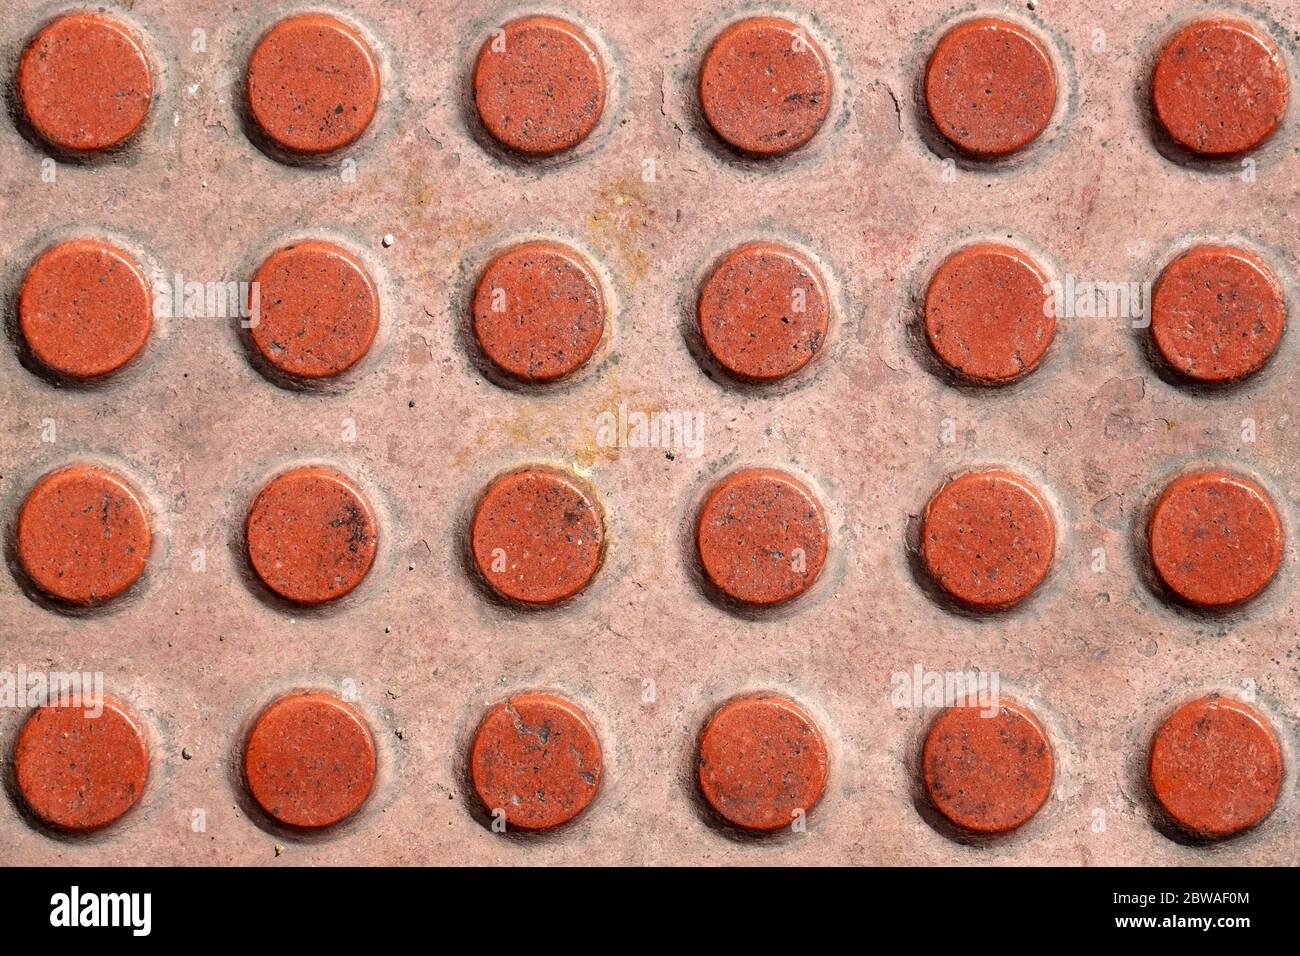 Tactile paving texture. Truncated domes top view. Detectable warnings. Close-up of walking surface indicators. Stock Photo